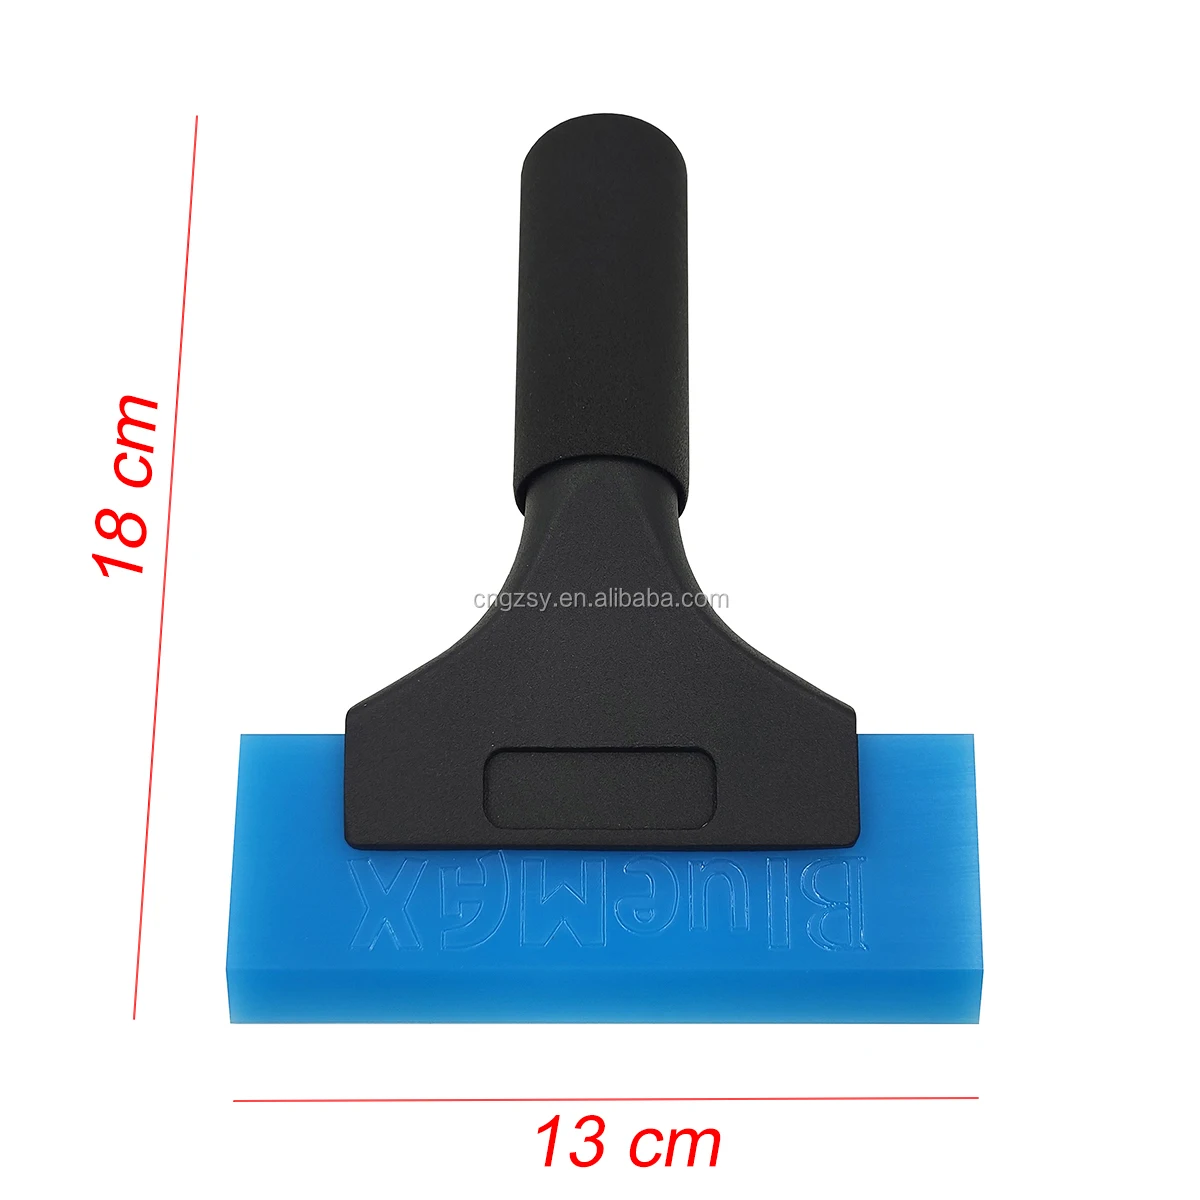 Anti-Scratch Rubber Mini Squeegee Window Tint Squeegee Tools Zanch Small Squeegee,2Pcs PPF Squeegee Mirror/Window/Household Cleaning Water Blade Scraper for Vinyl Wrap 